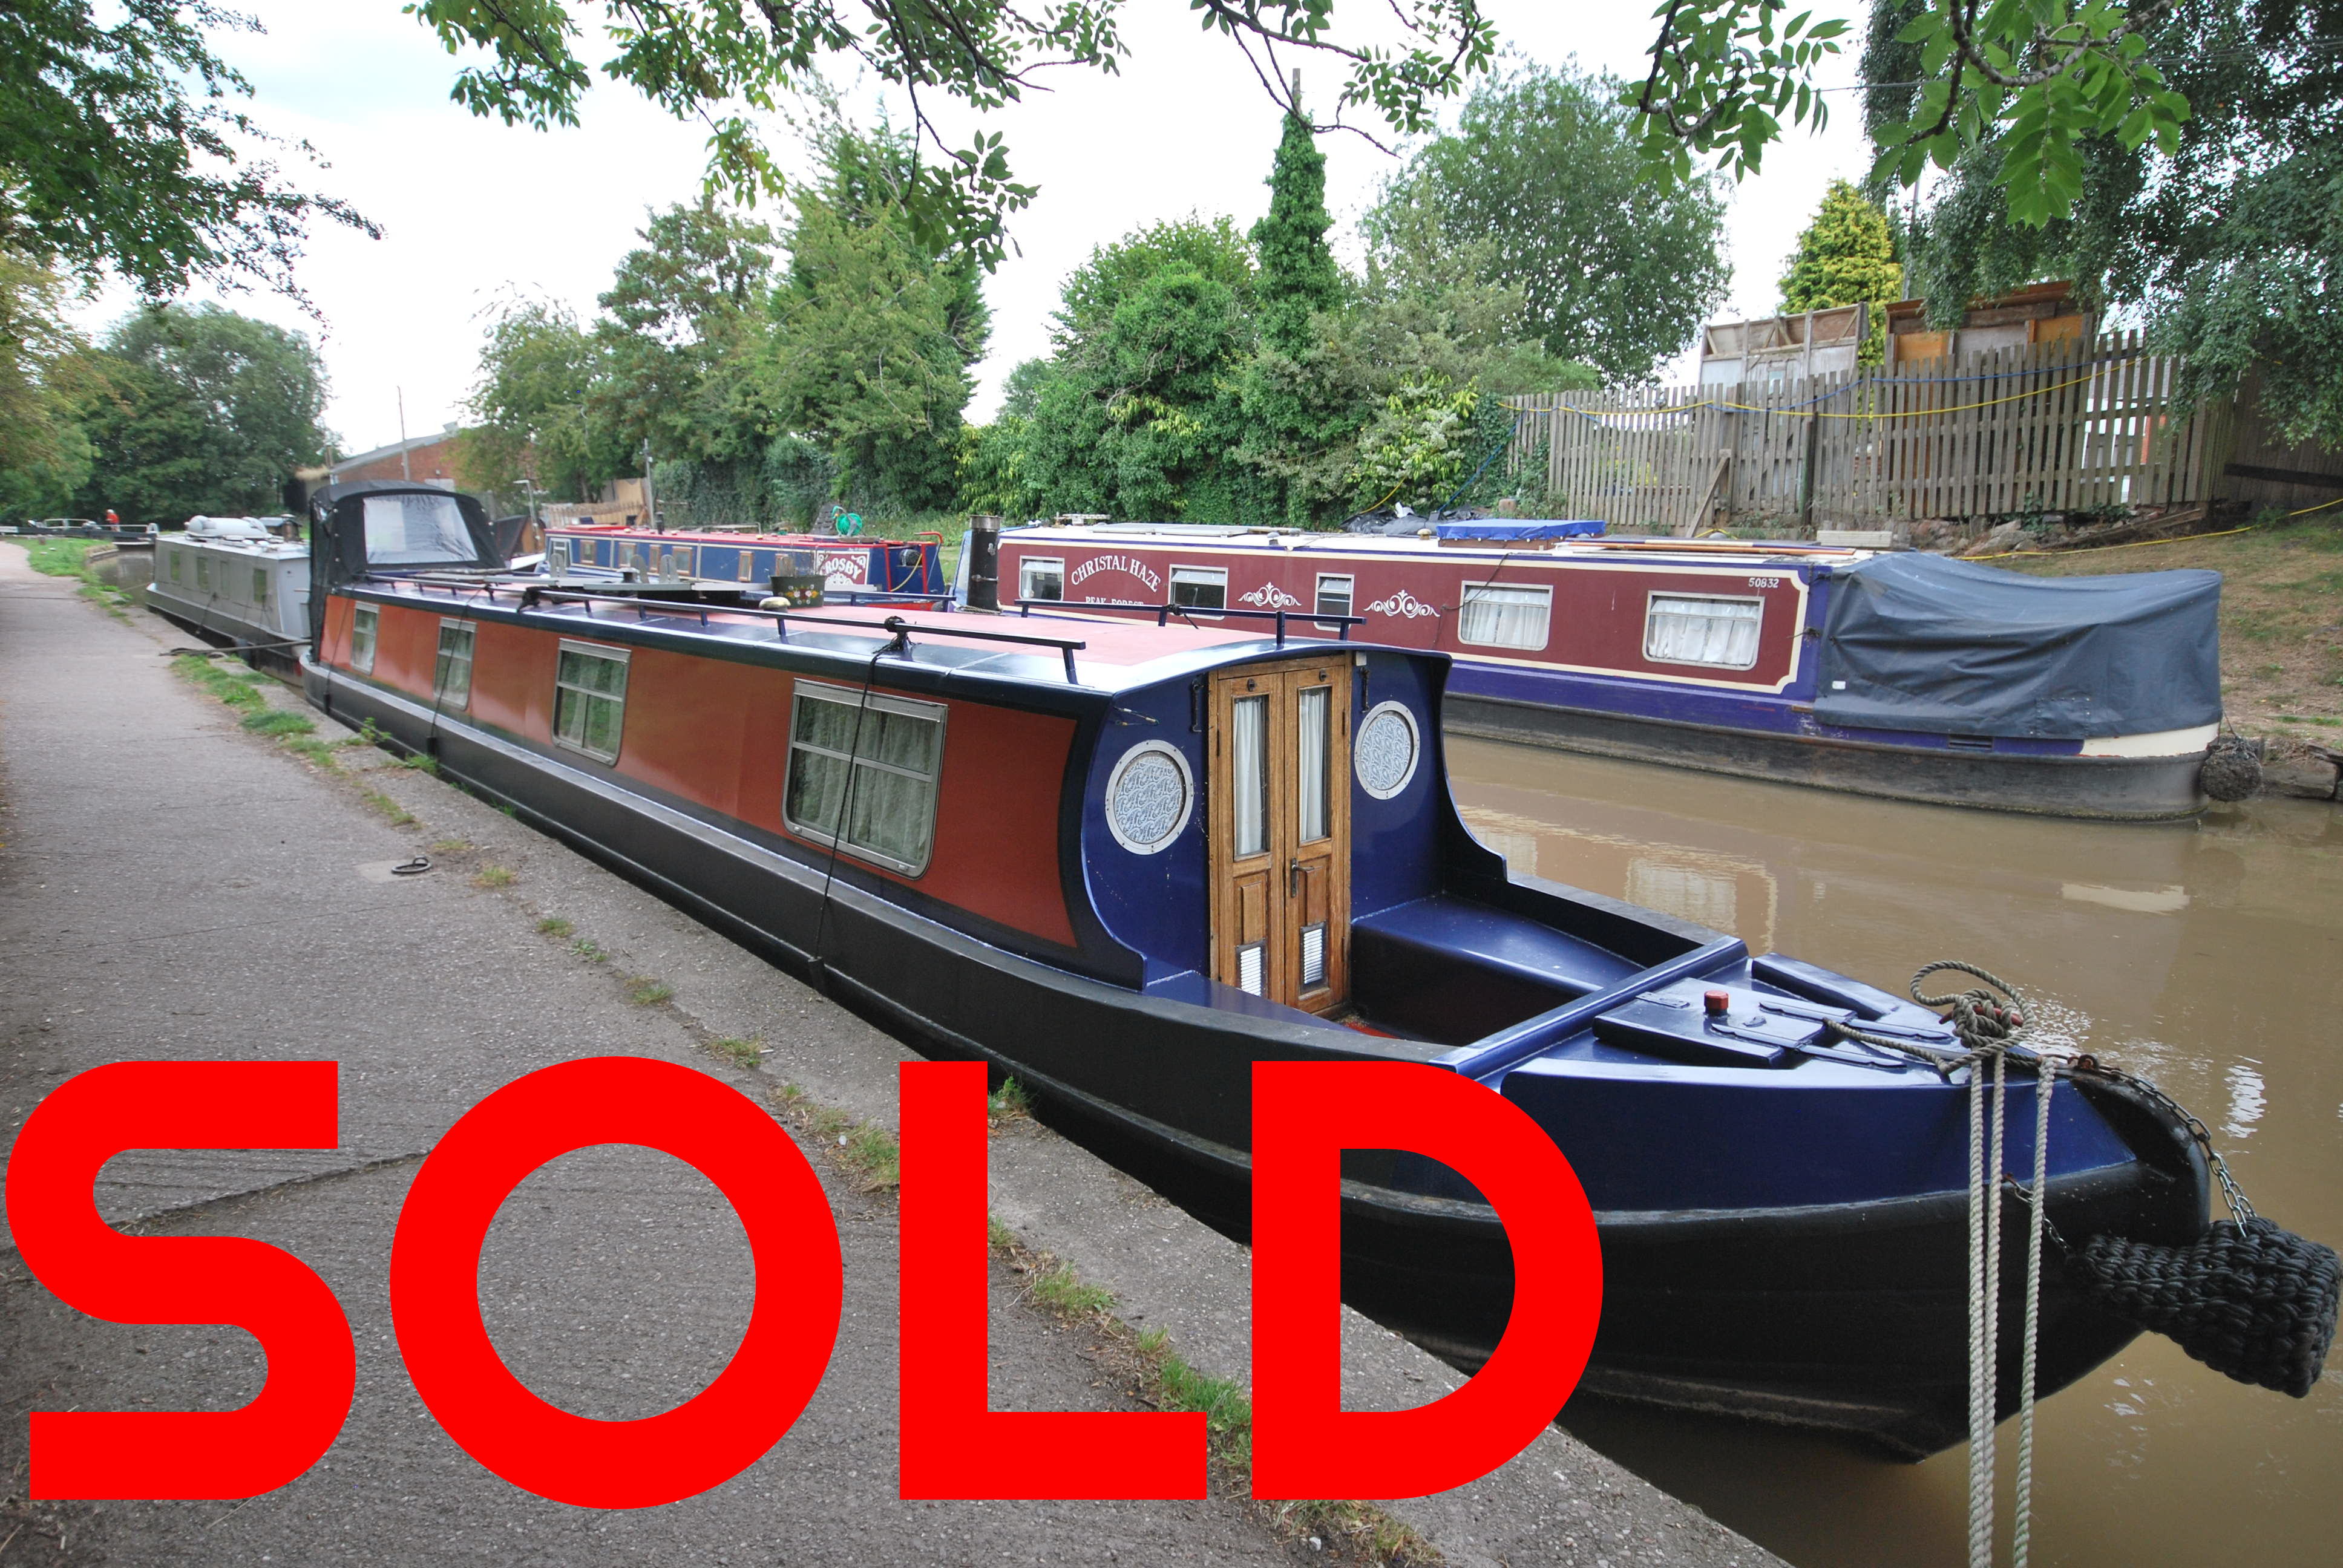 Luvly Jubbly - 56ft Cruiser Stern Liveaboard Narrowboat - For Sale 1